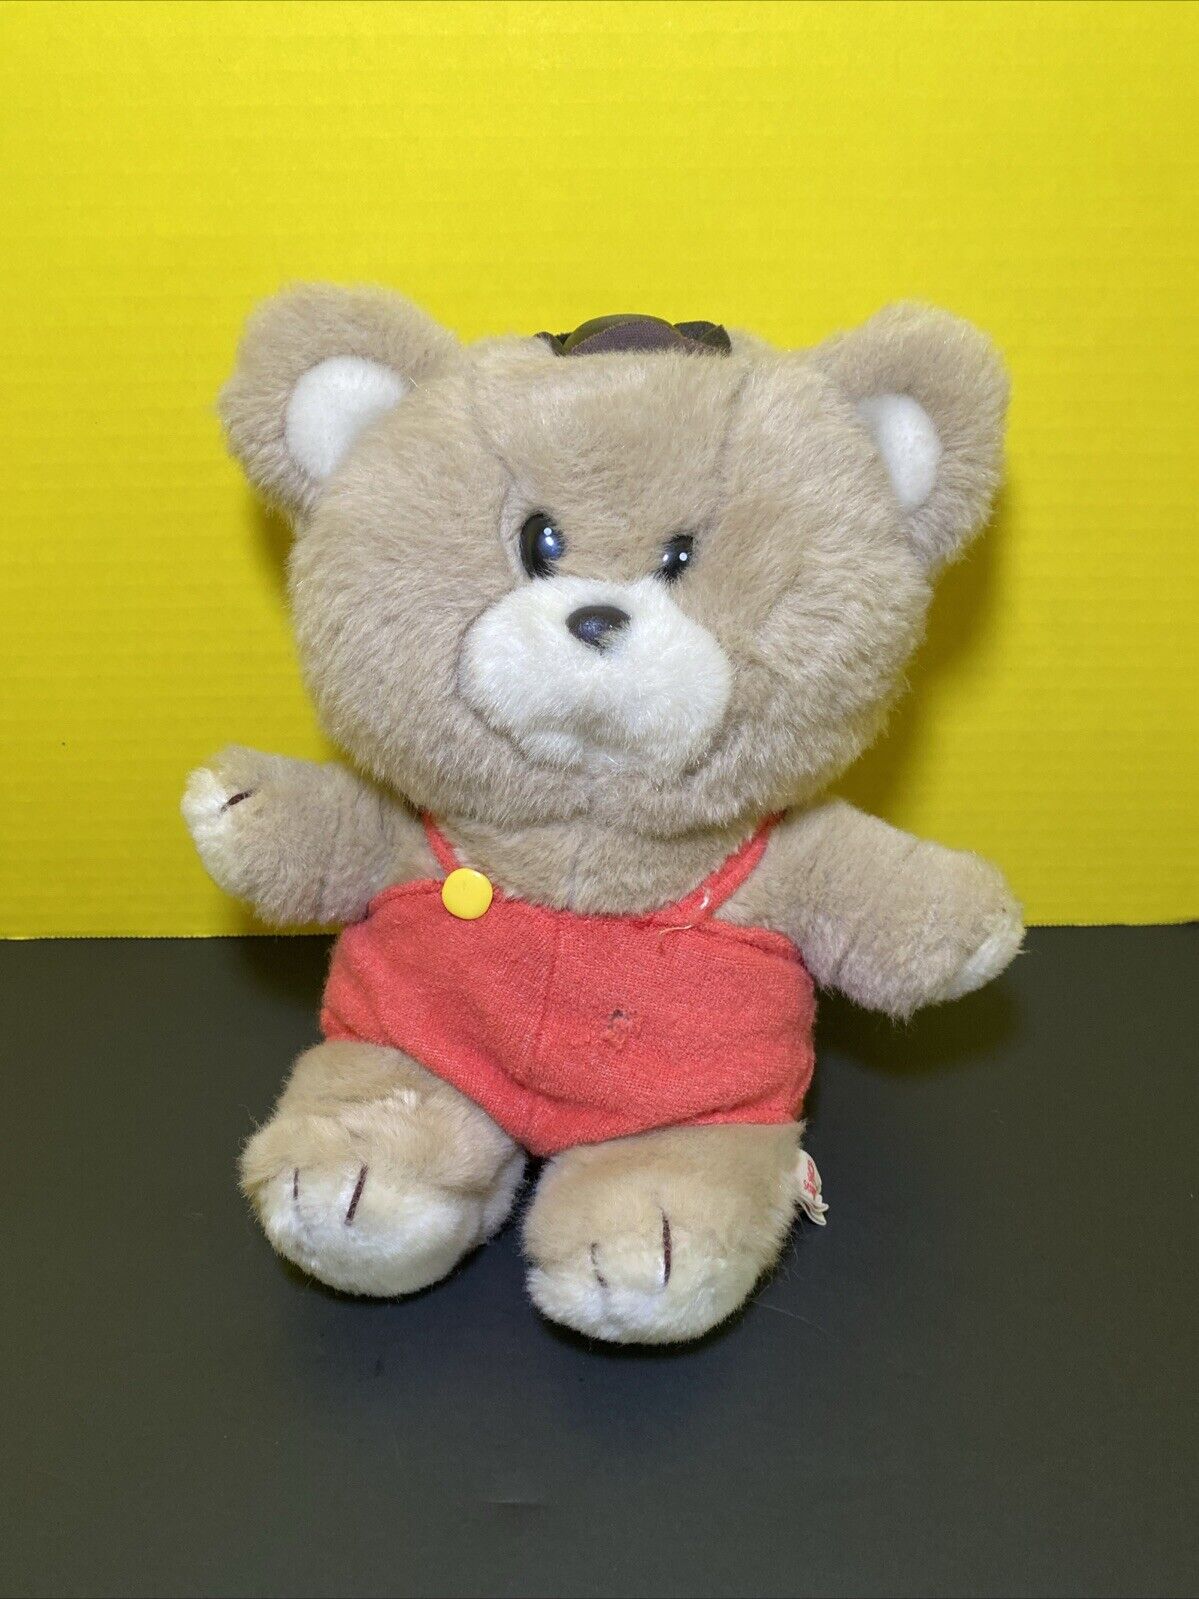 Sanrio Pals Plush Bear Red Overalls Brown Hat Vintage 1976 Toy Tan Teddy Lovey